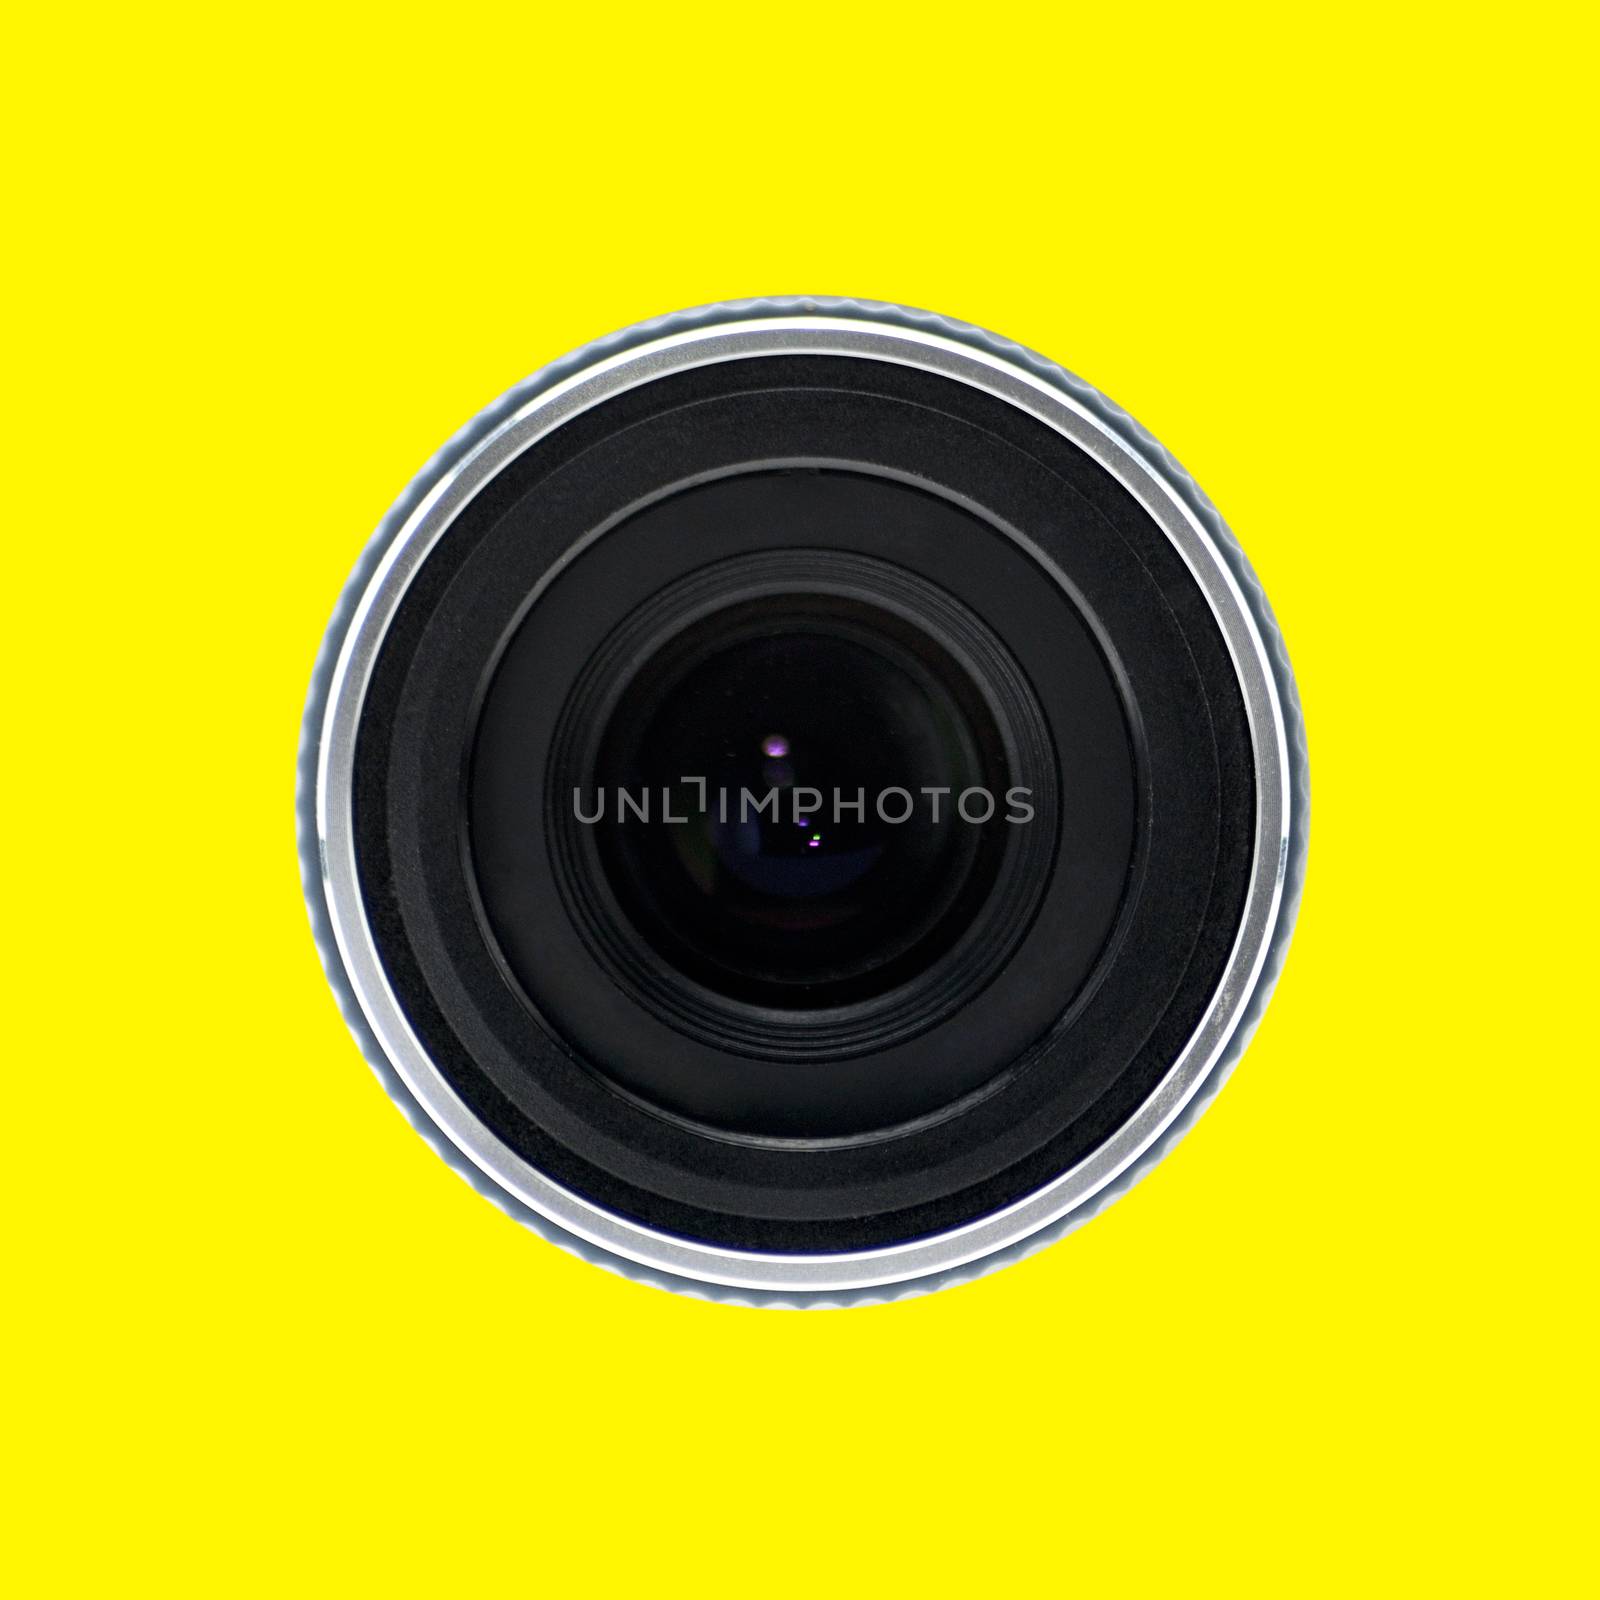 Lens of a semi-professional video camcorder used for shooting video clips on Isolated white background